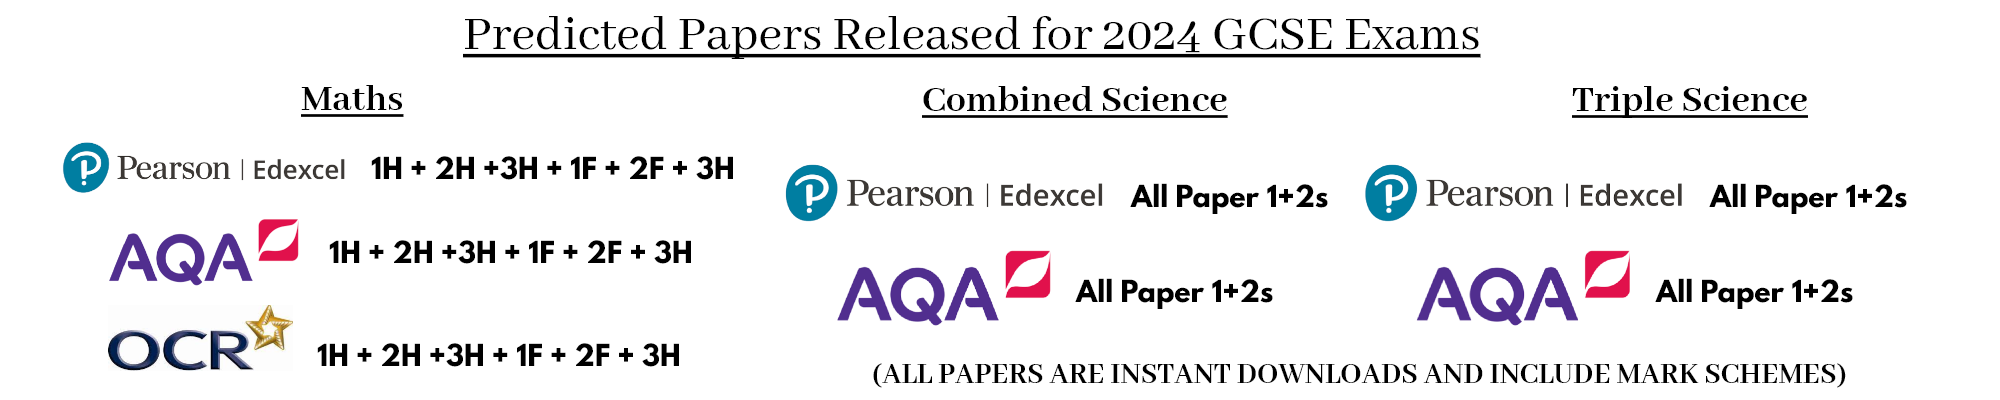 Predicted Papers Released for 2024 GCSE Exams